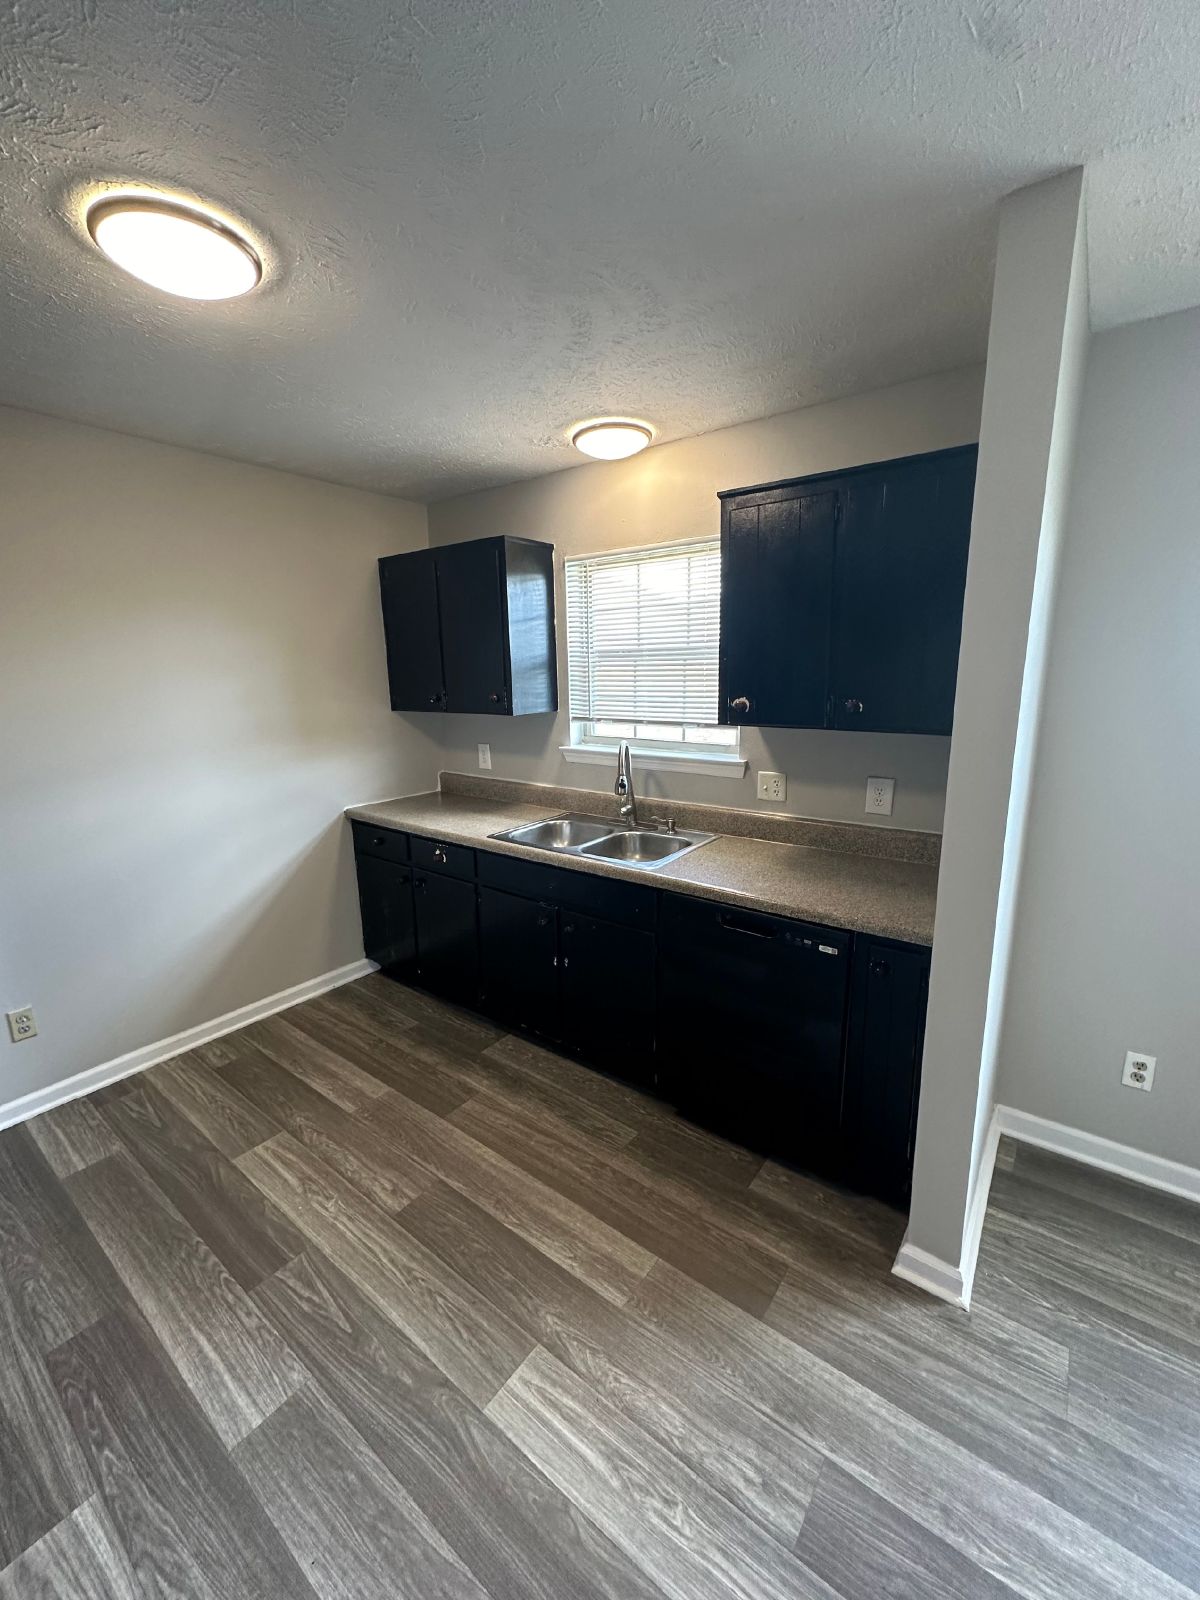 Freshly Renovated PRIVATE 2Bed / 2Bath Apartment Min from MTSU! property image